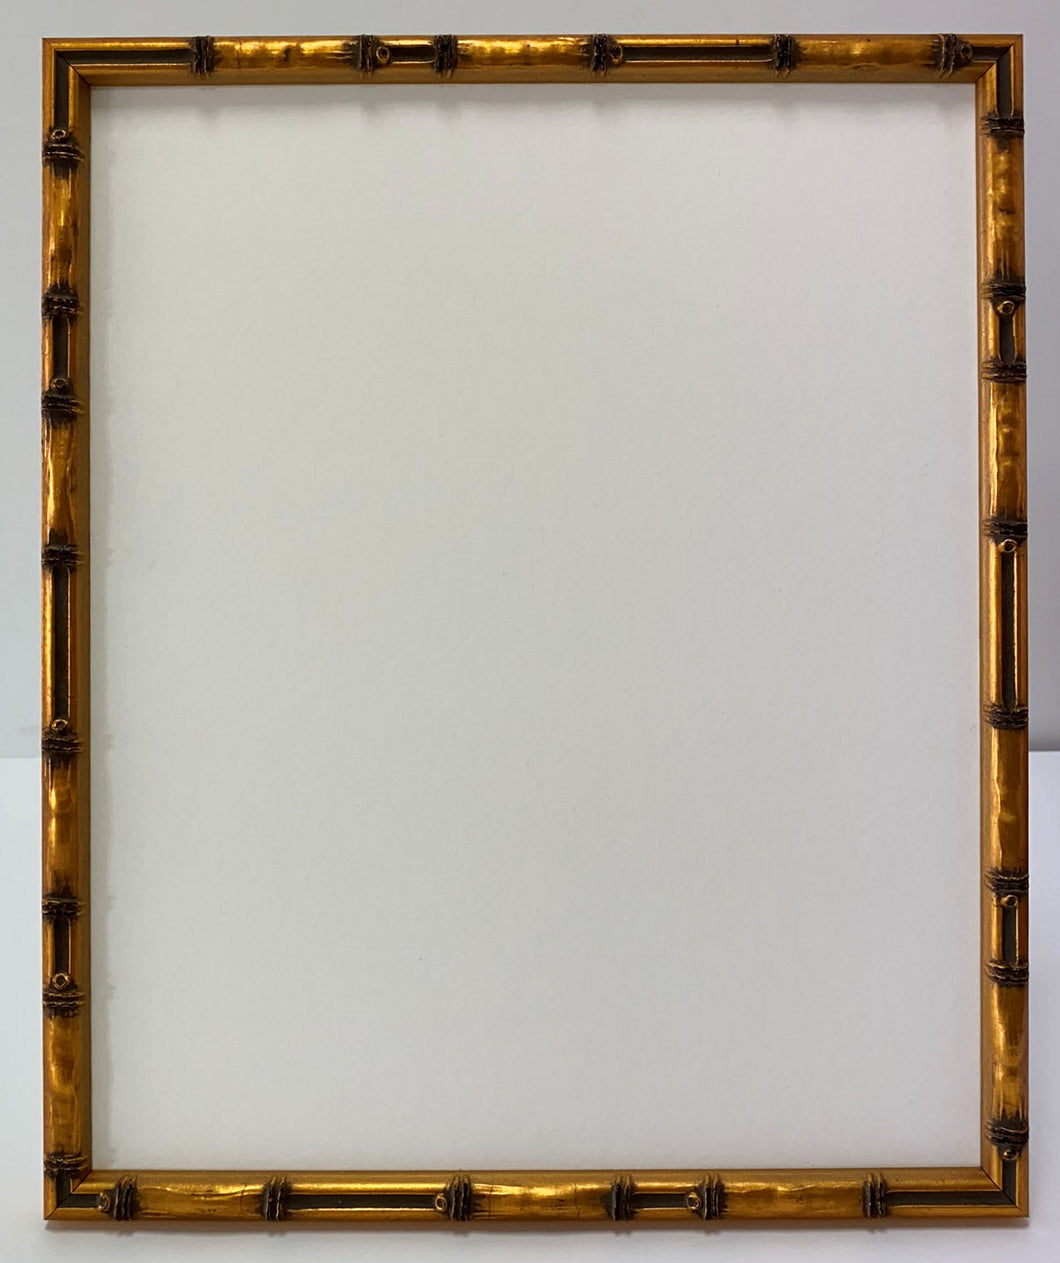 Gold Bamboo wooden picture frame